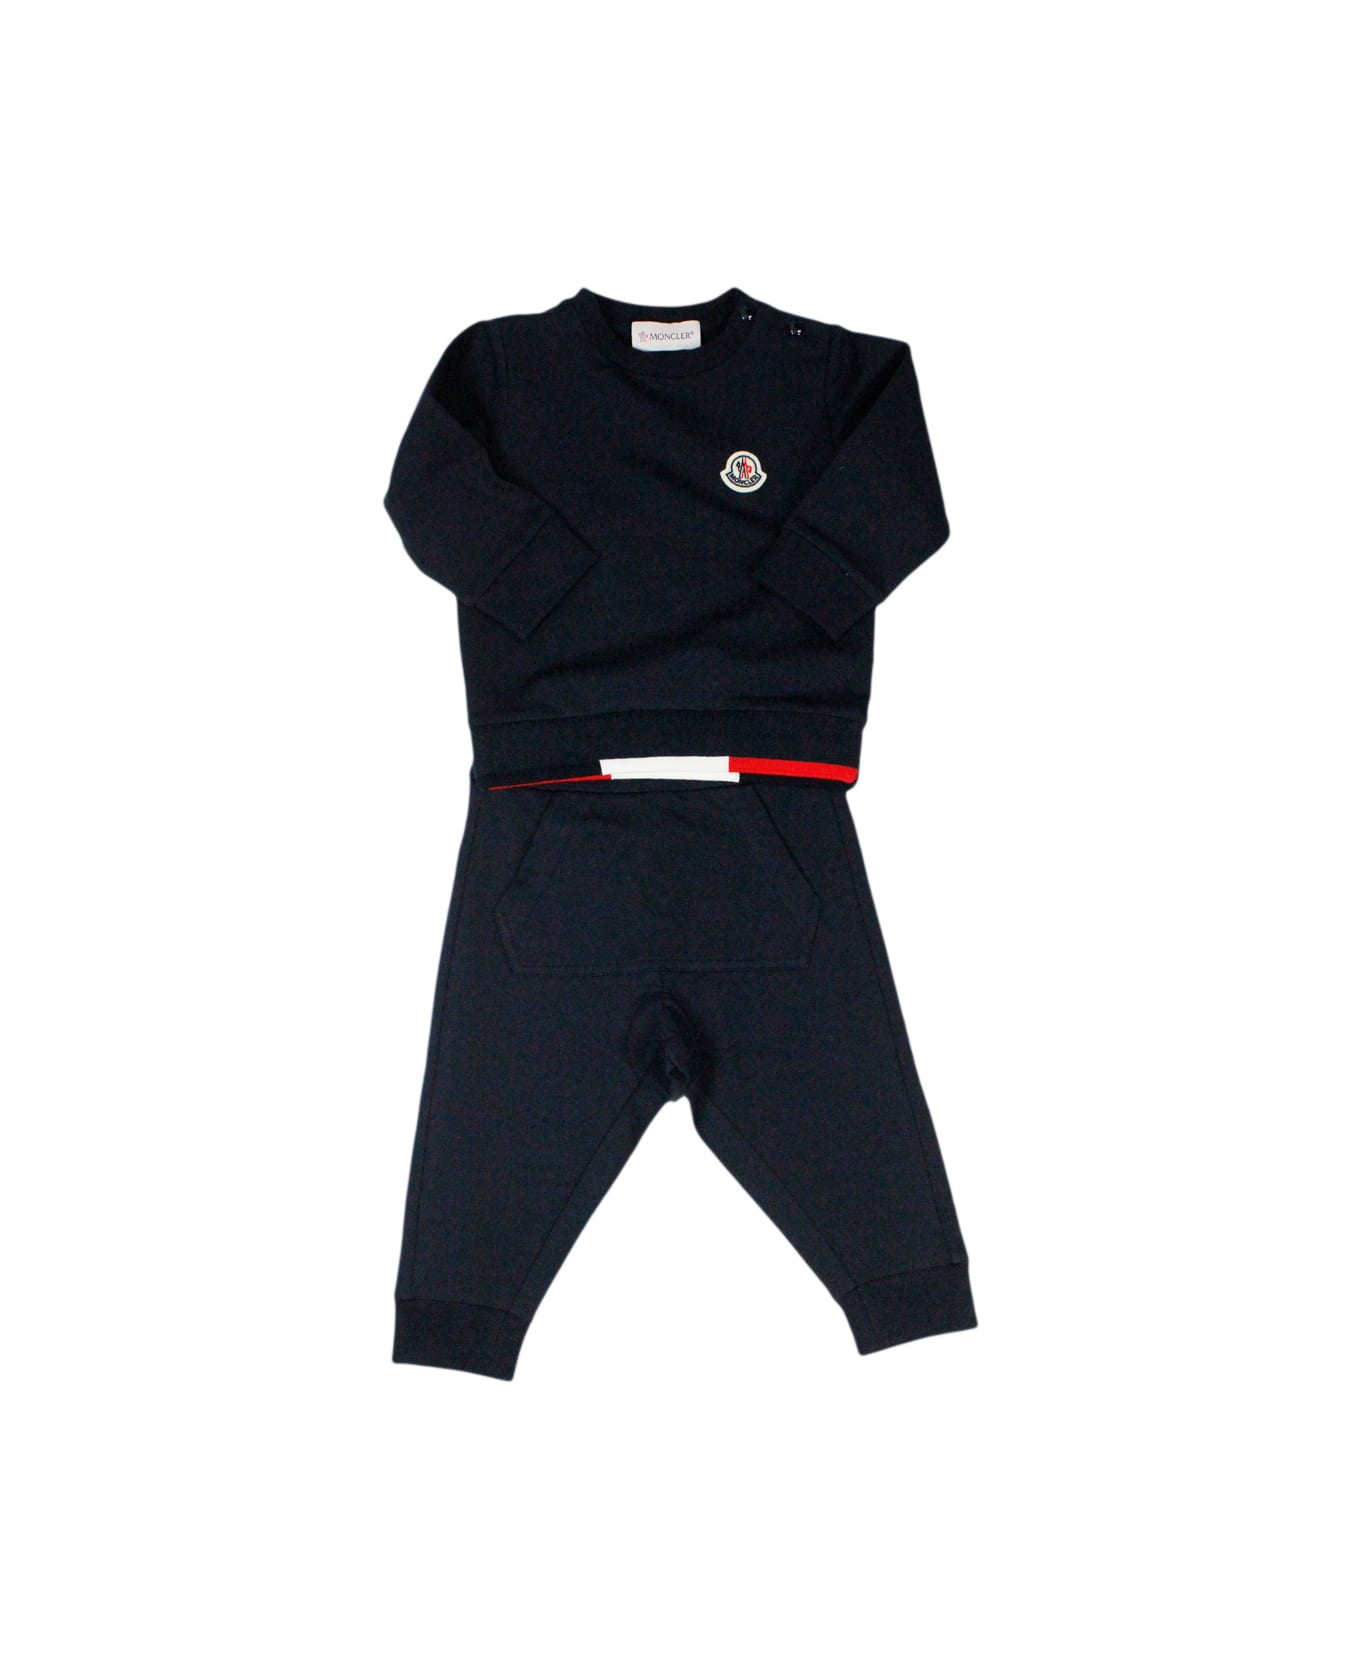 Moncler Cotton Jersey Tracksuit Consisting Of Trousers With Elastic Waist And Crewneck Sweatshirt - Blu ボディスーツ＆セットアップ